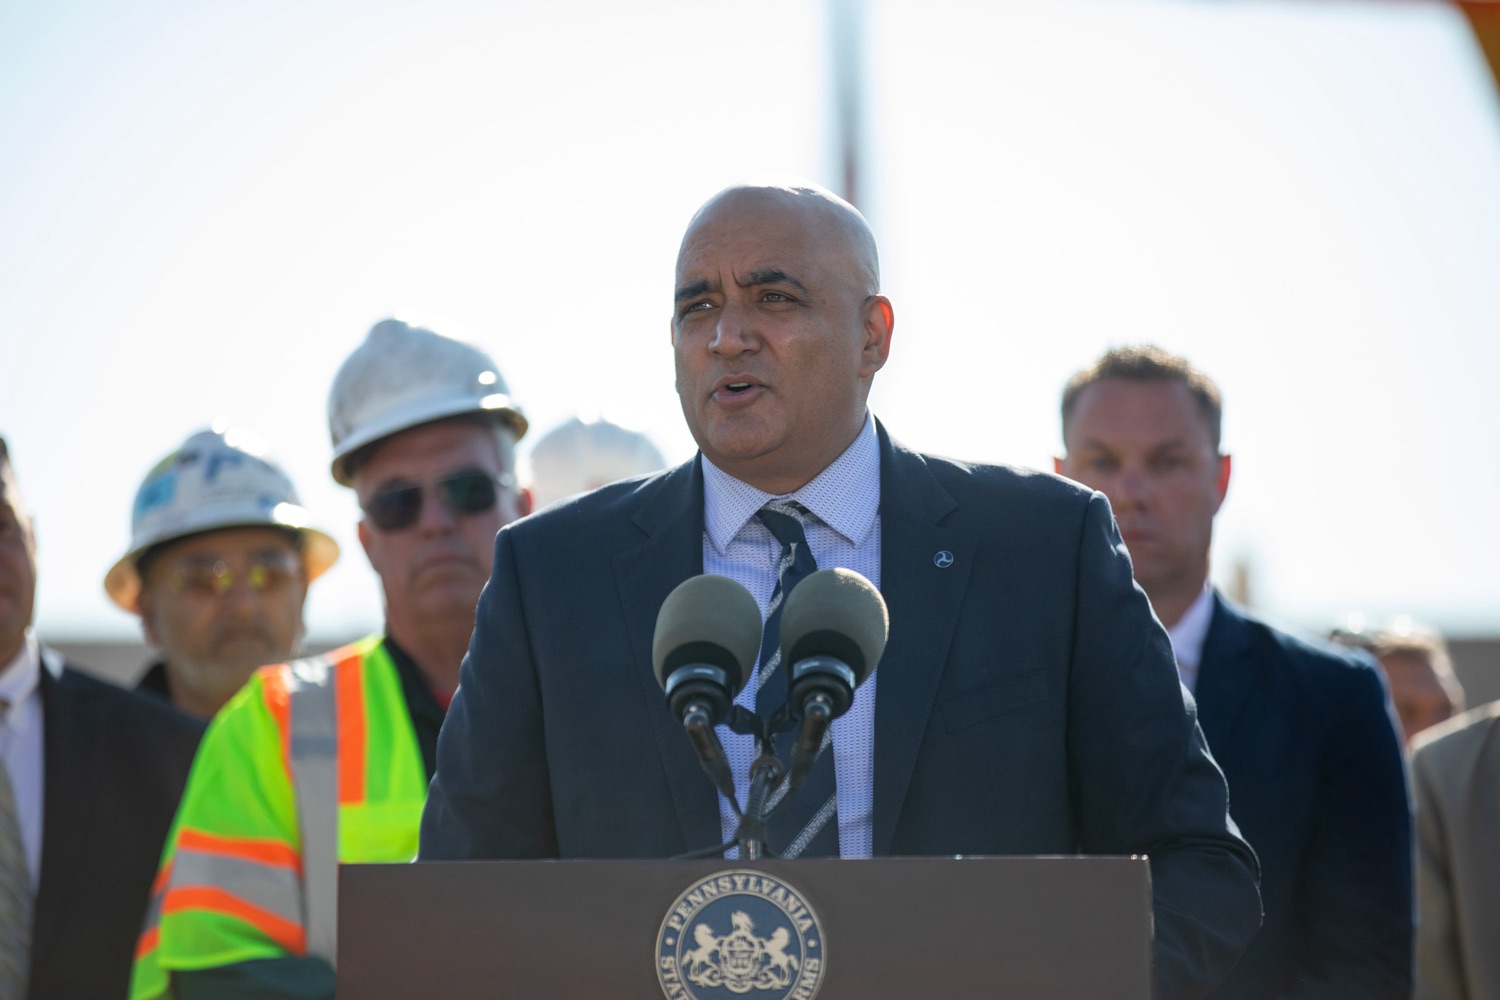 Federal Highway Administrator Shailen Bhatt joined Pennsylvania Department of Transportation (PennDOT) Secretary Mike Carroll and local officials to commemorate the shifting of traffic from the temporary roadway onto the new Interstate 95 in northeast Philadelphia, which will begin on Monday evening. .Governor Shapiro and Secretary Carroll have led a coordinated state, local, and federal response to reopen the roadway safely and as quickly as possible, and efforts have been ahead of schedule each step of the way to get traffic flowing on I-95 again. A temporary roadway with six lanes of traffic opened on June 23, only 12 days after the initial fire and collapse..<br><a href="https://filesource.amperwave.net/commonwealthofpa/photo/24009_PennDOT_I95Switch_ERD_014.jpg" target="_blank">⇣ Download Photo</a>